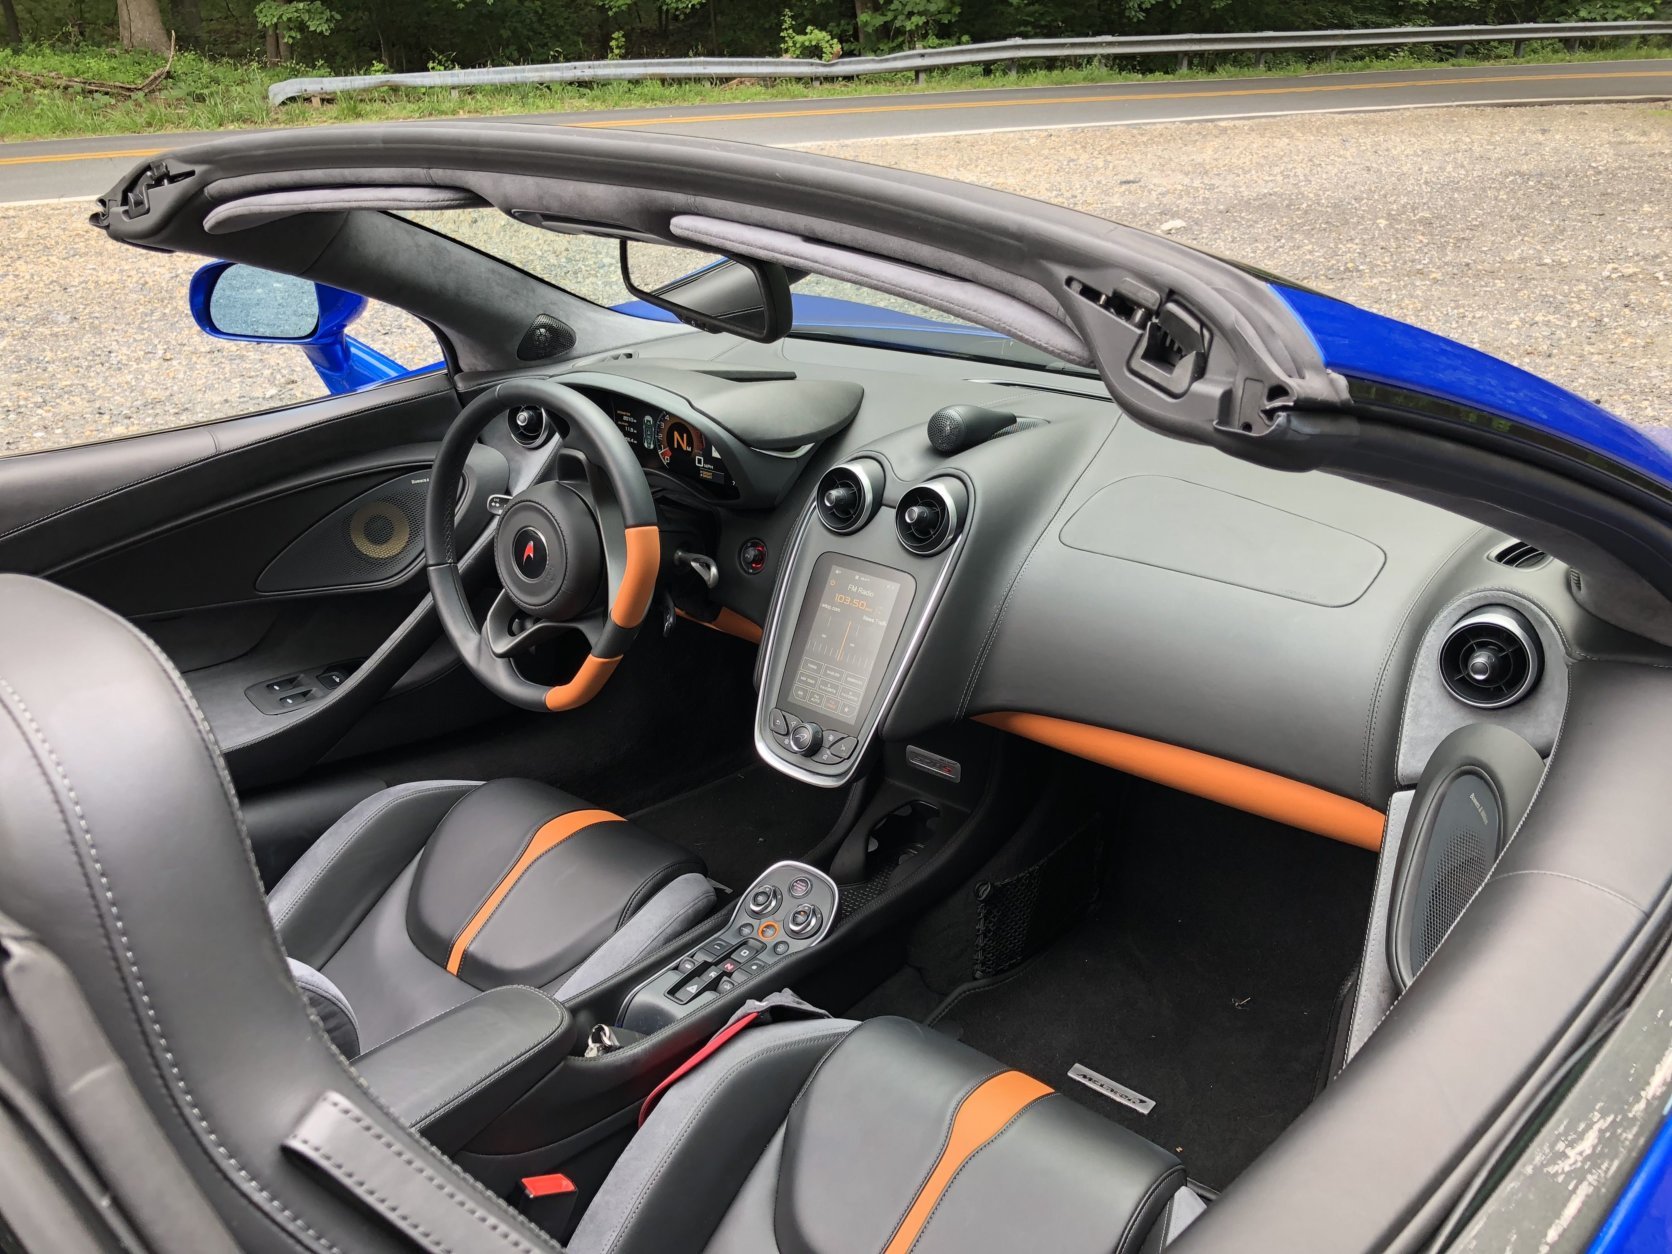 The inside is as stylish as the outside and it’s very easy to use. The seats are Nappa leather and are more comfortable than expected. There are simple manual controls for the seats. (WTOP/Mike Parris)